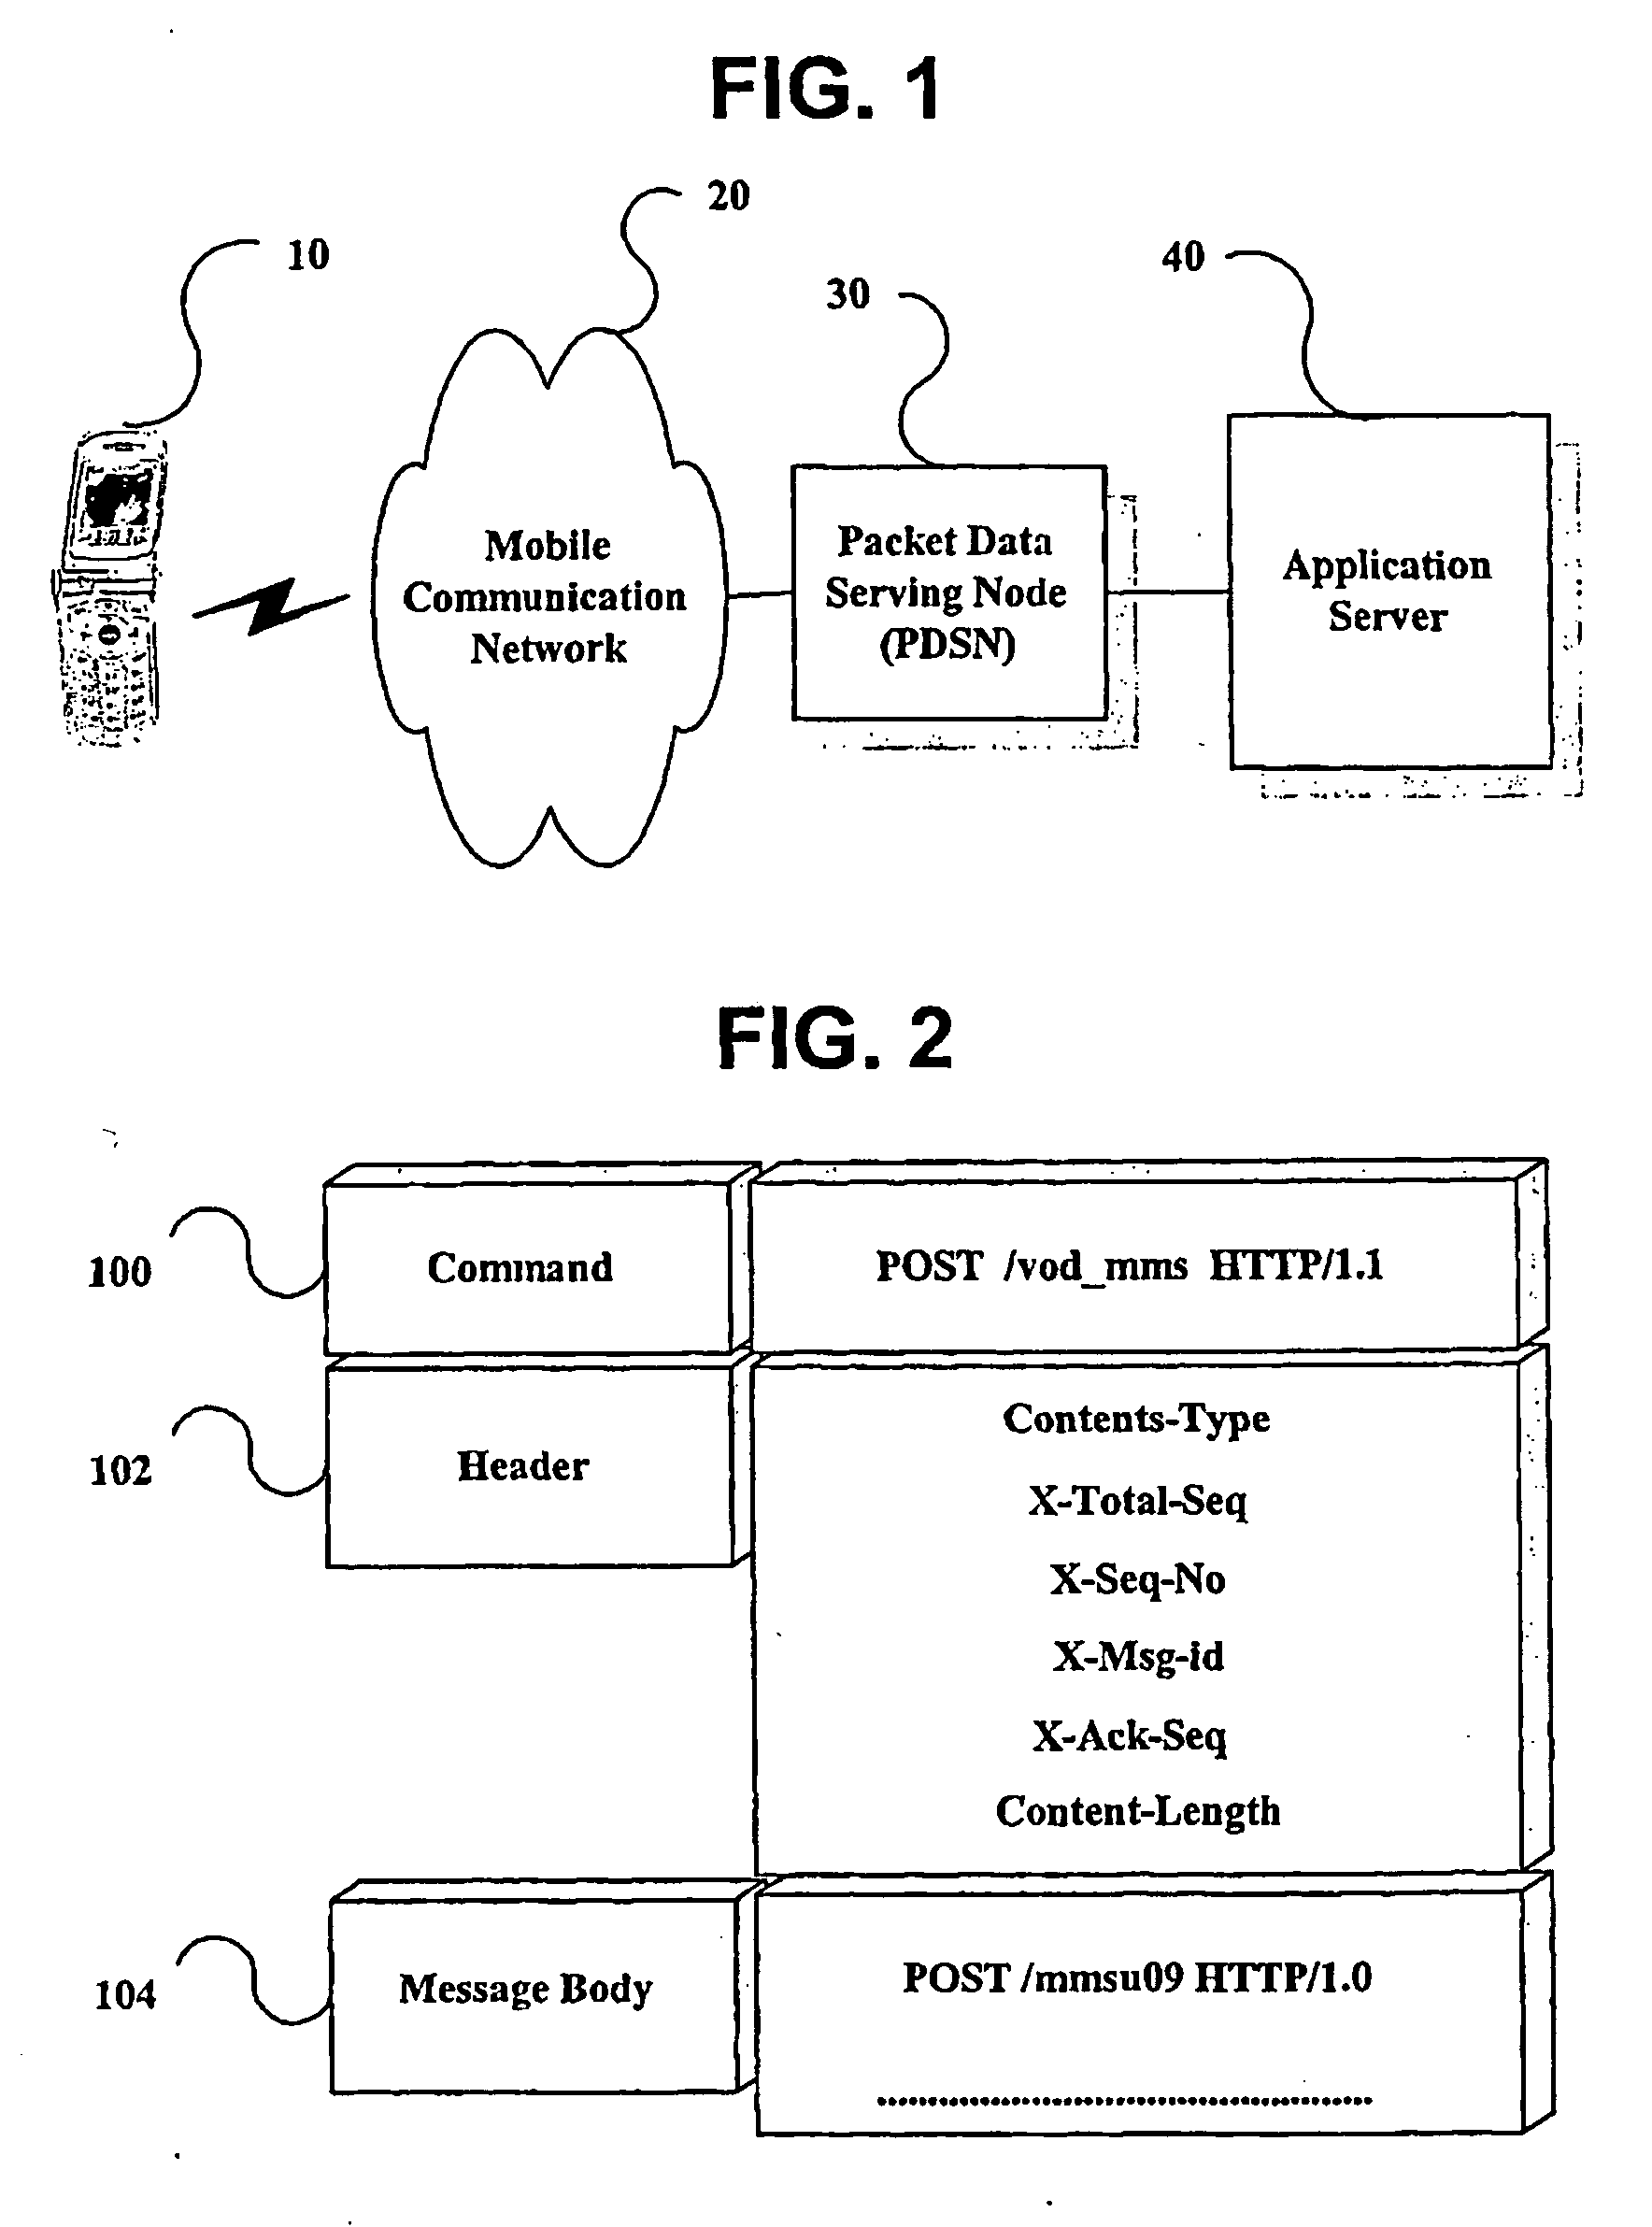 Method for controlling a media message upload through a wireless communication network